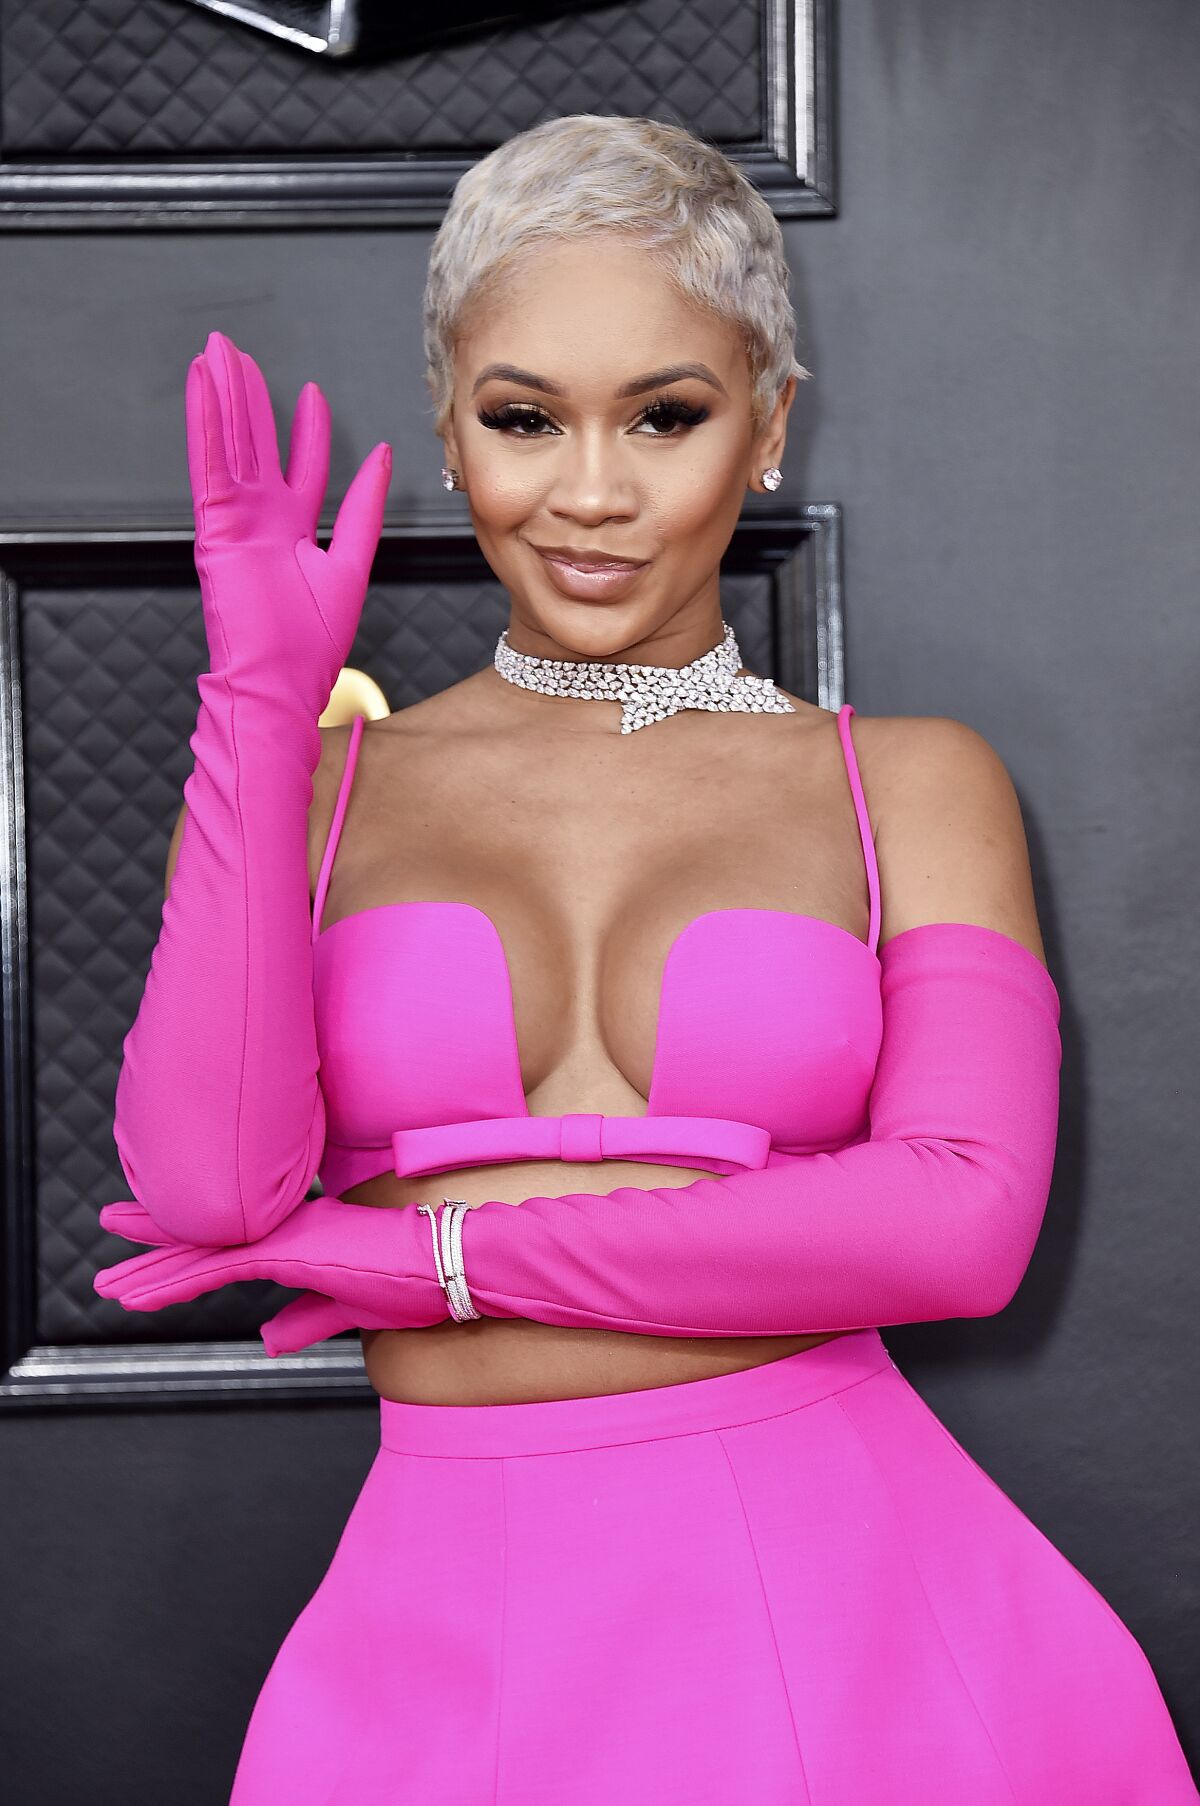 Saweetie arrives at the 64th Annual Grammy Awards